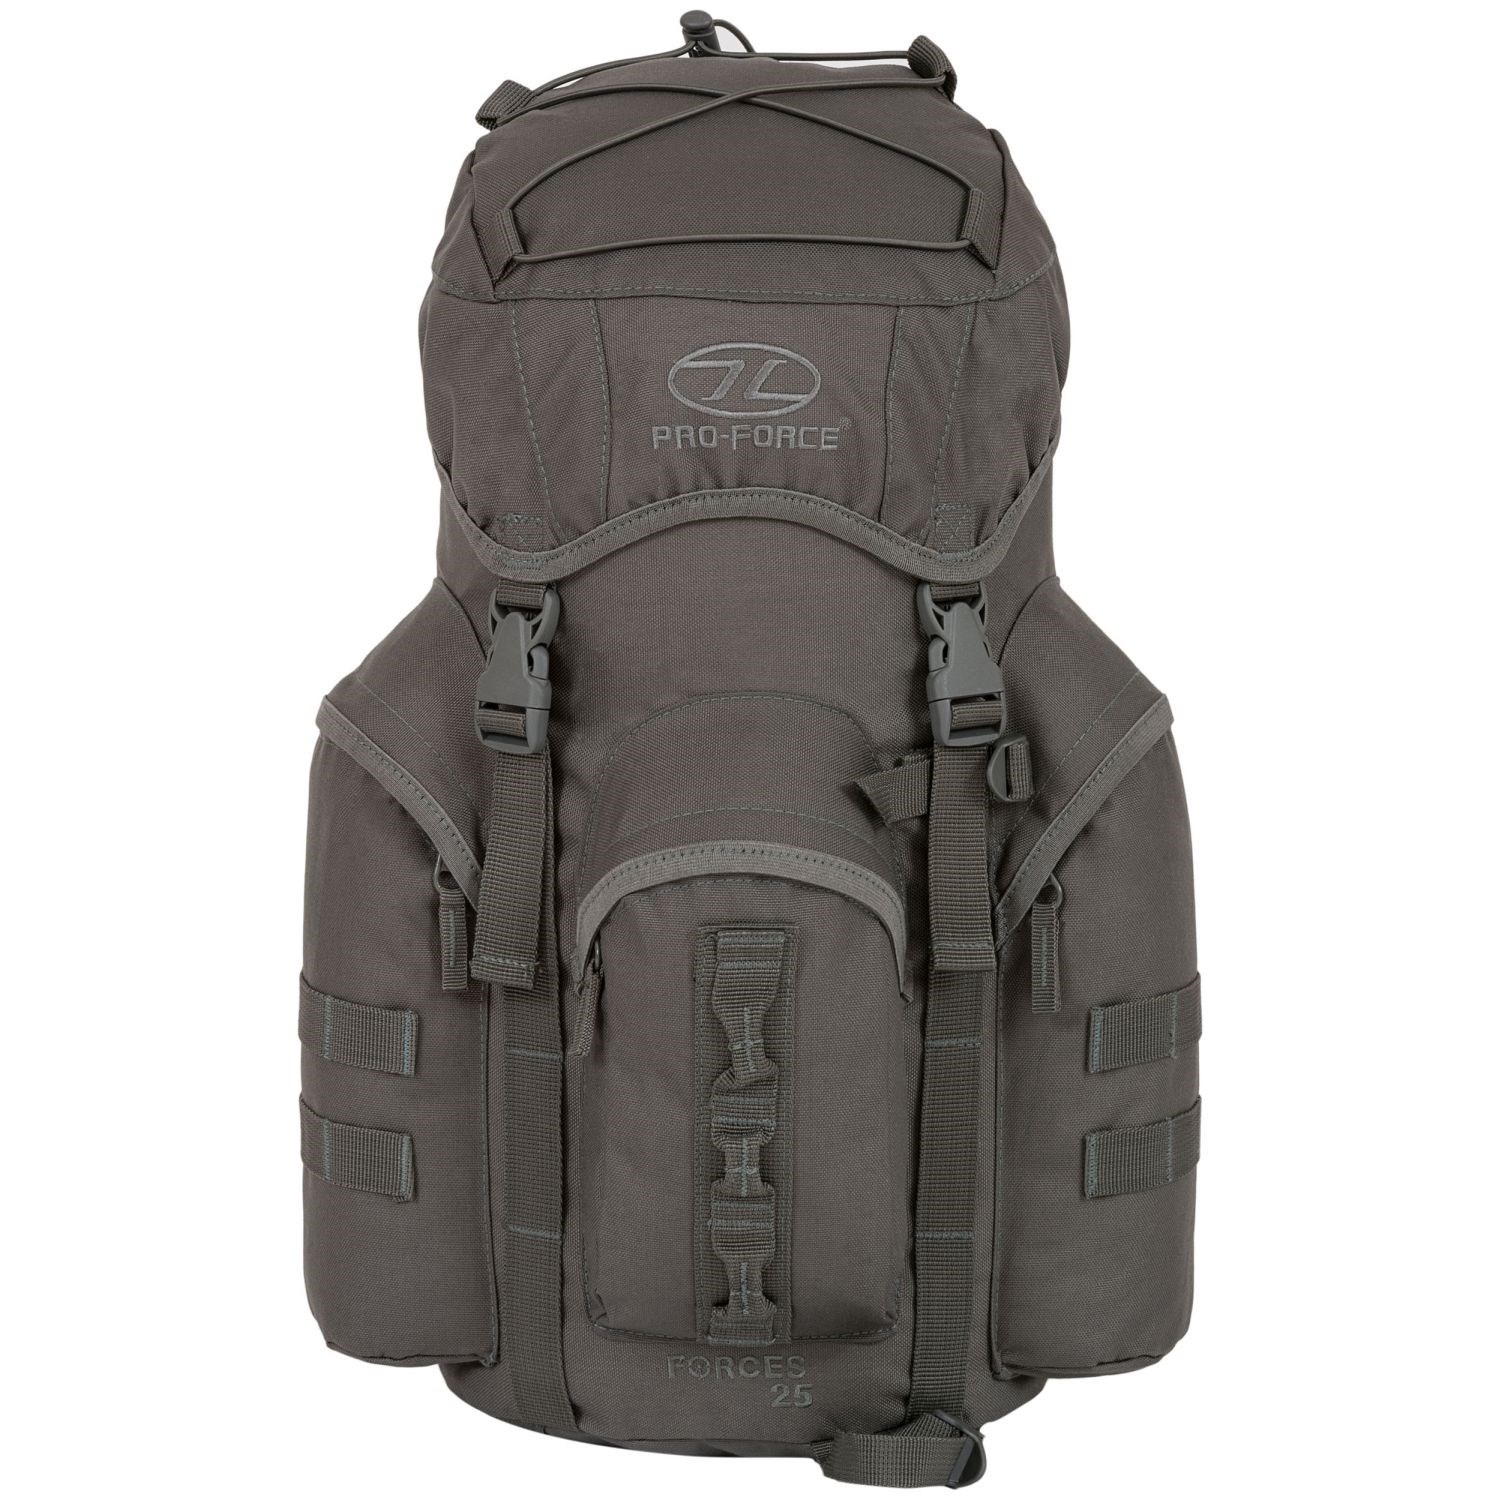 Backpack FORCES 25 GREY PRO-FORCE NRT025-GY L-11